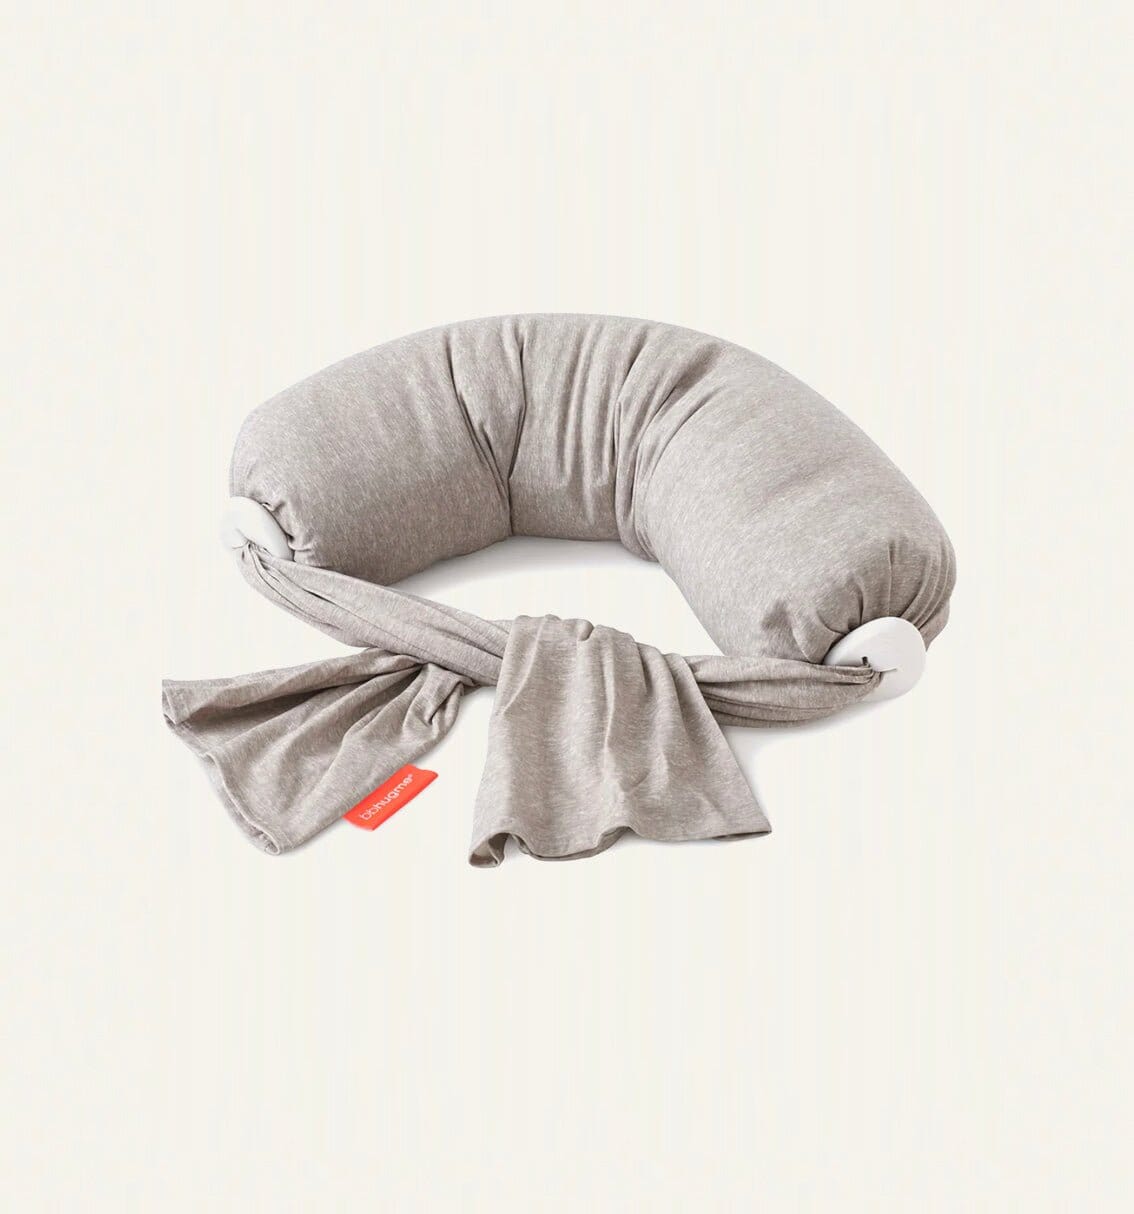 Rent the Bbhugme Nursing Pillow from just £9 a month